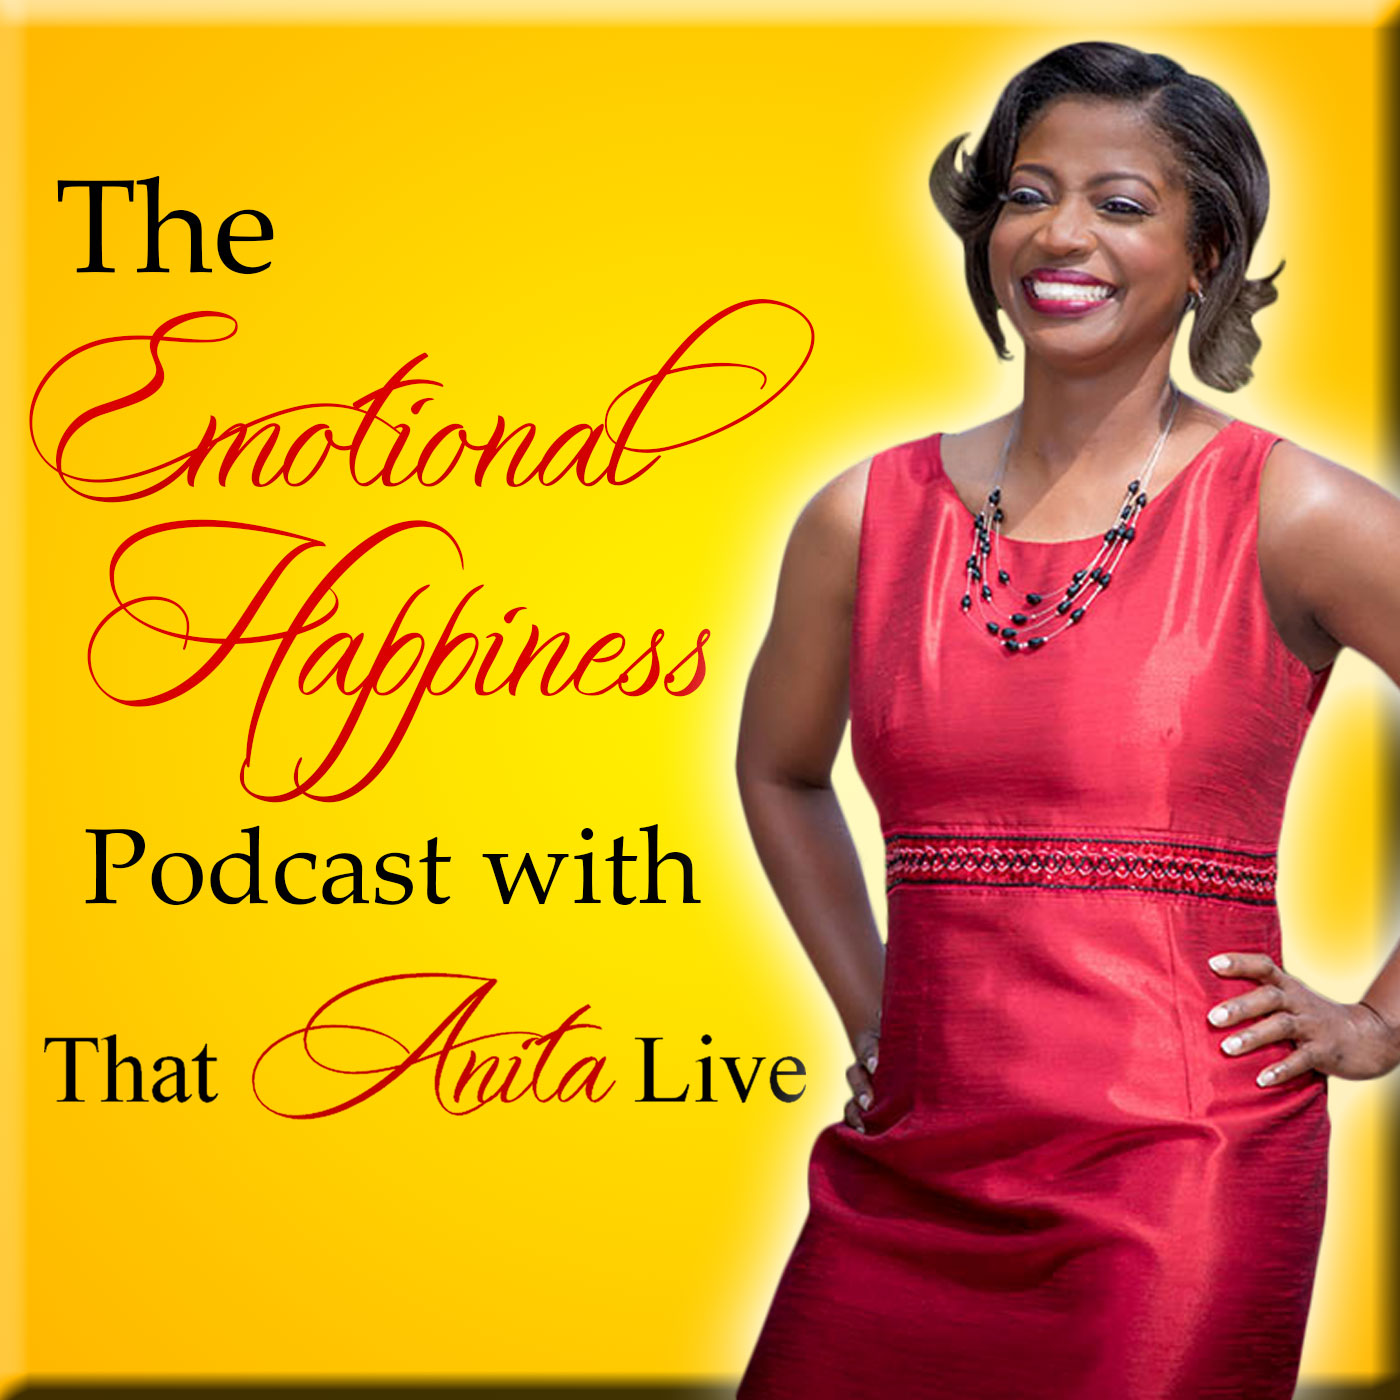 The Emotional Happiness Podcast with That Anita Live